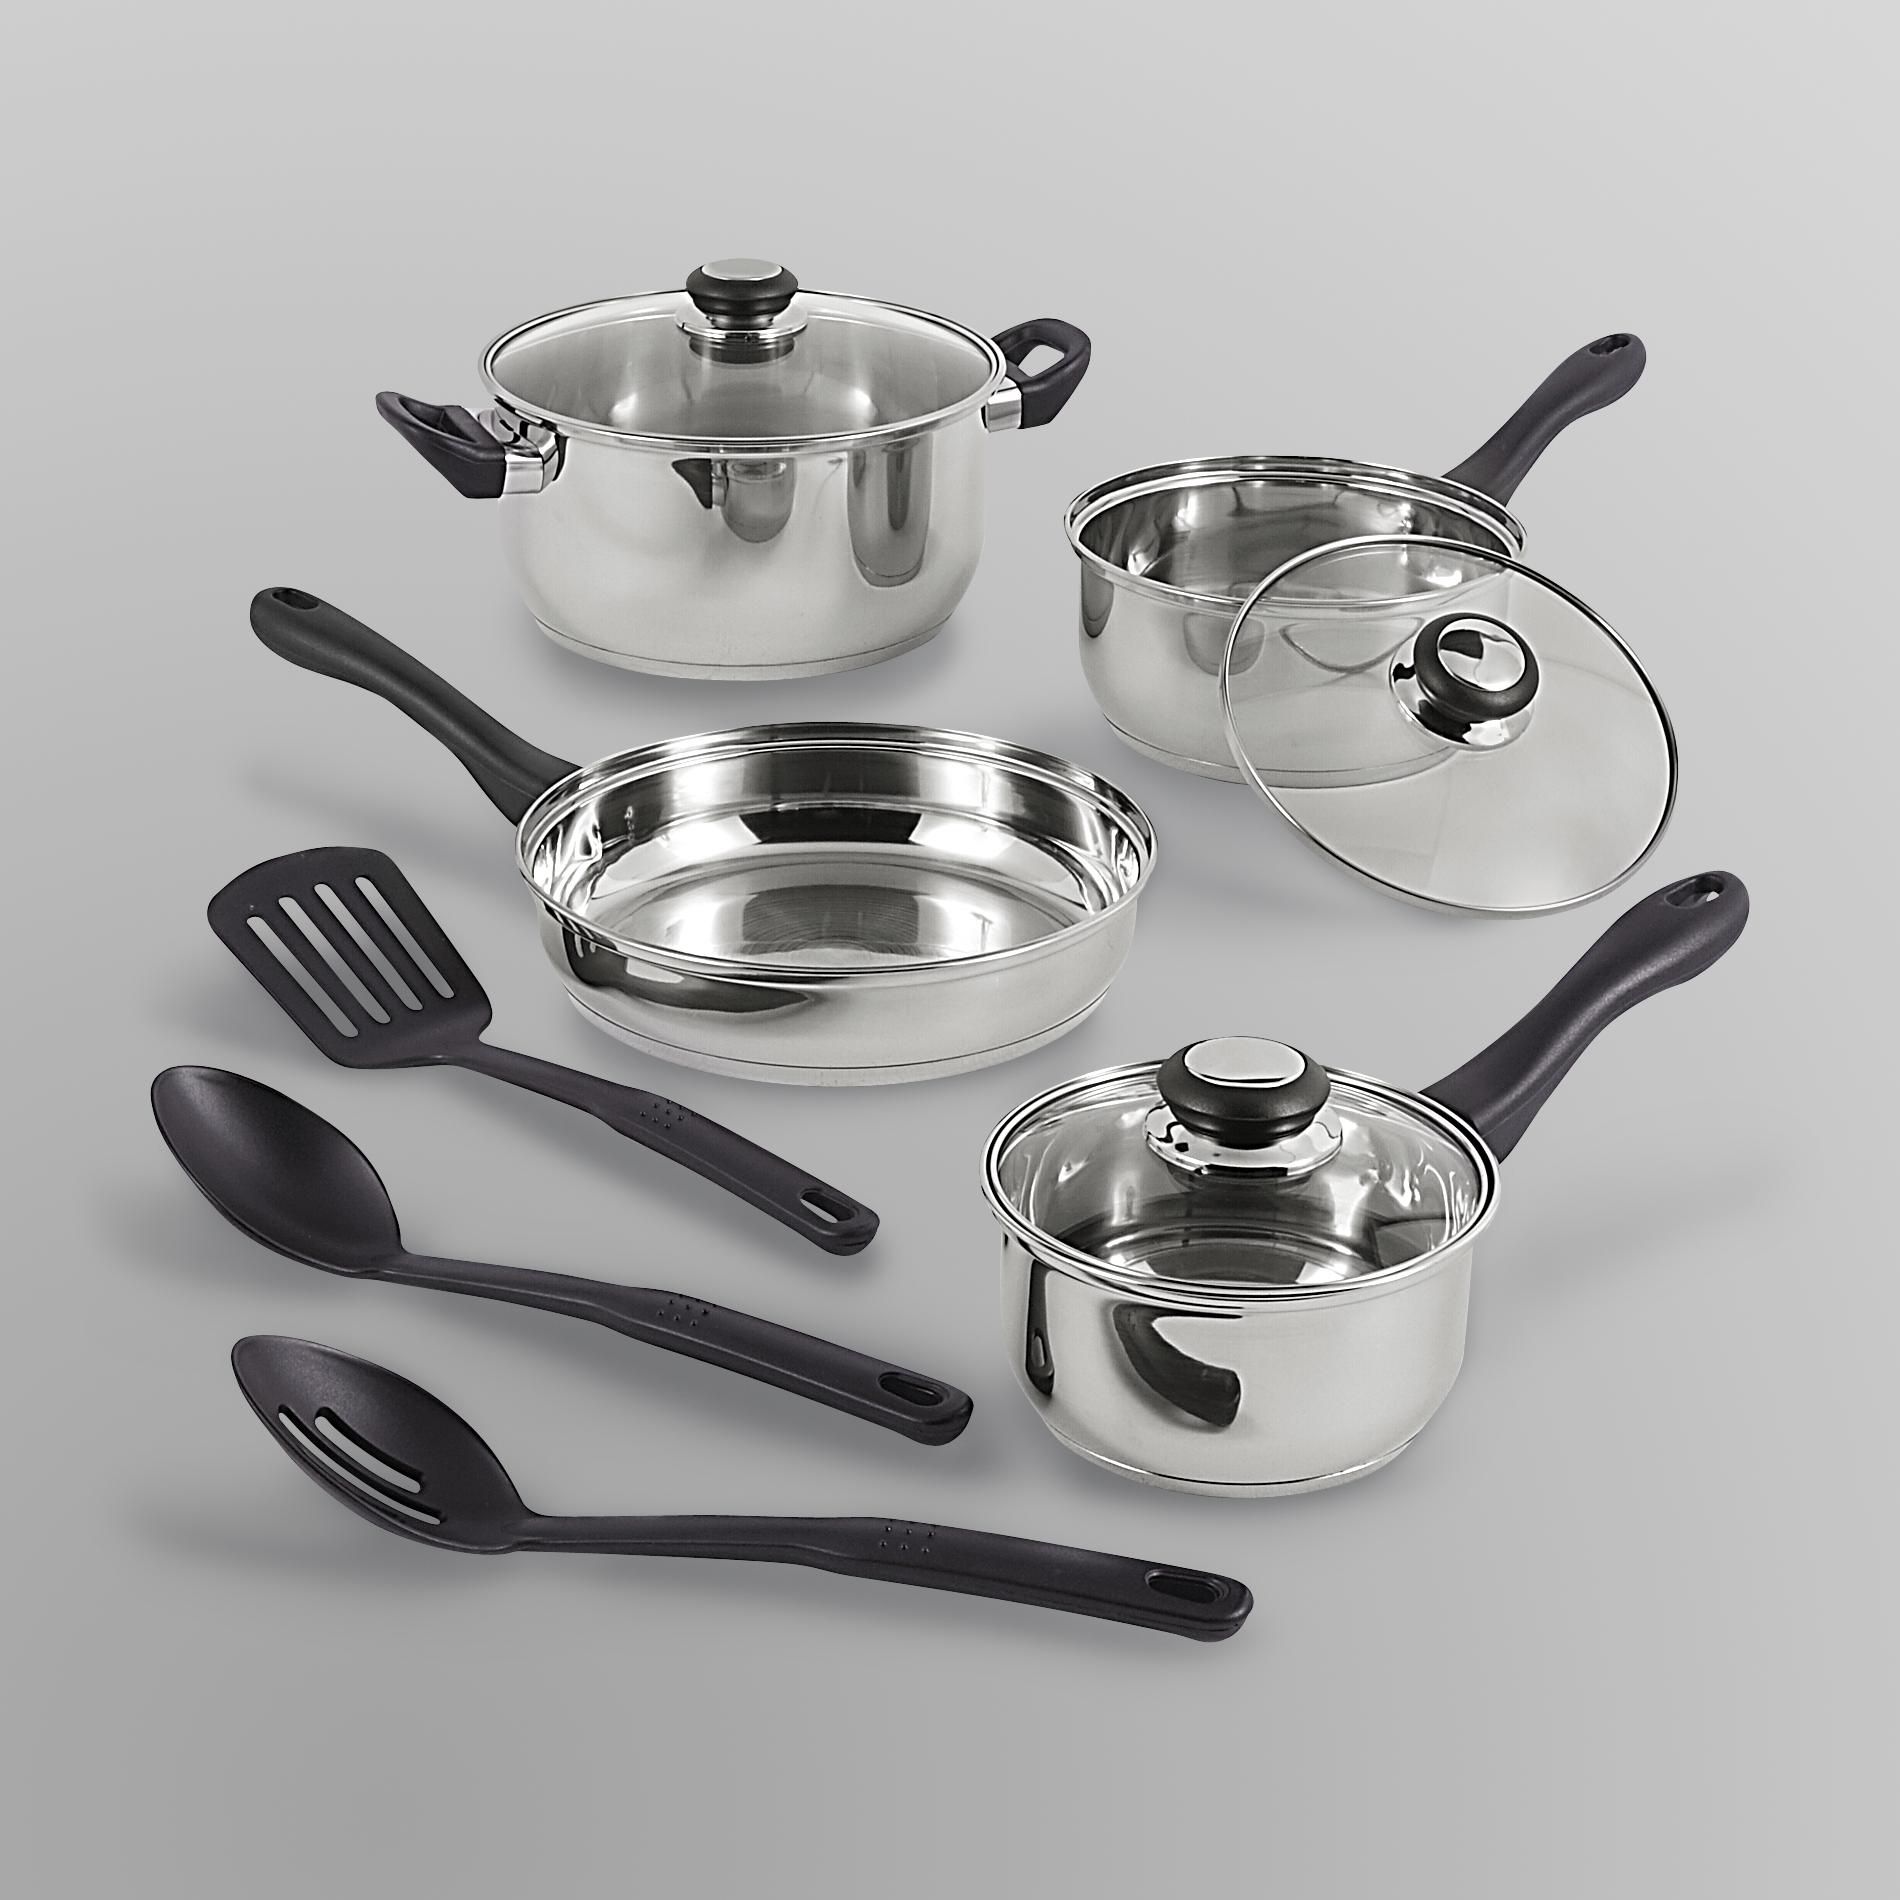 Tramontina 10 Pc. Stainless Steel Cookware Set